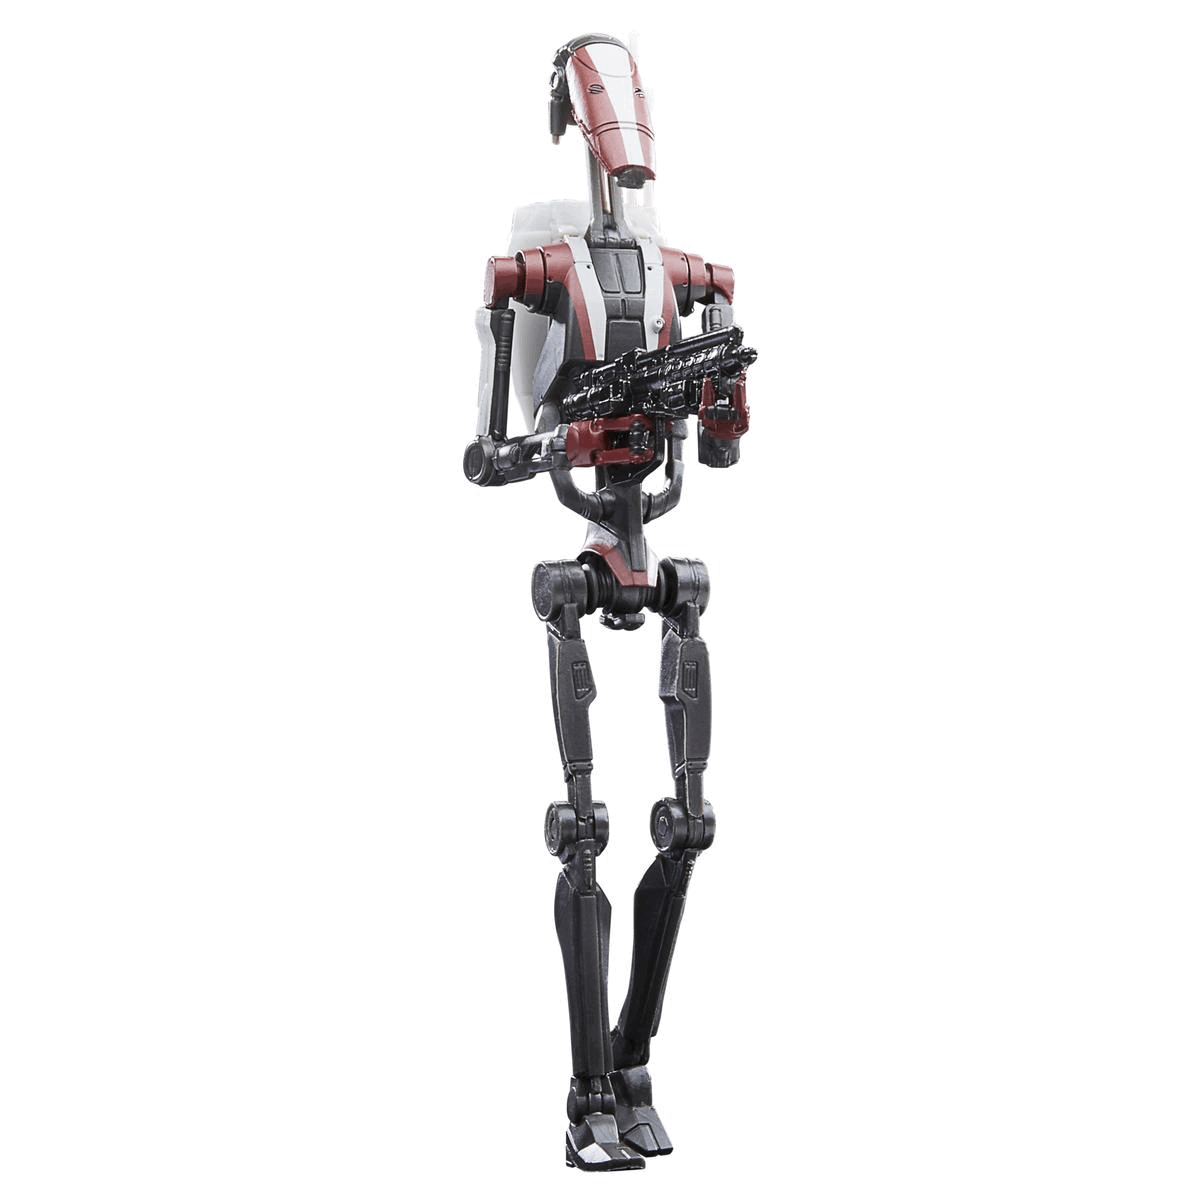 Droid figure gif showing the figure in multiple poses